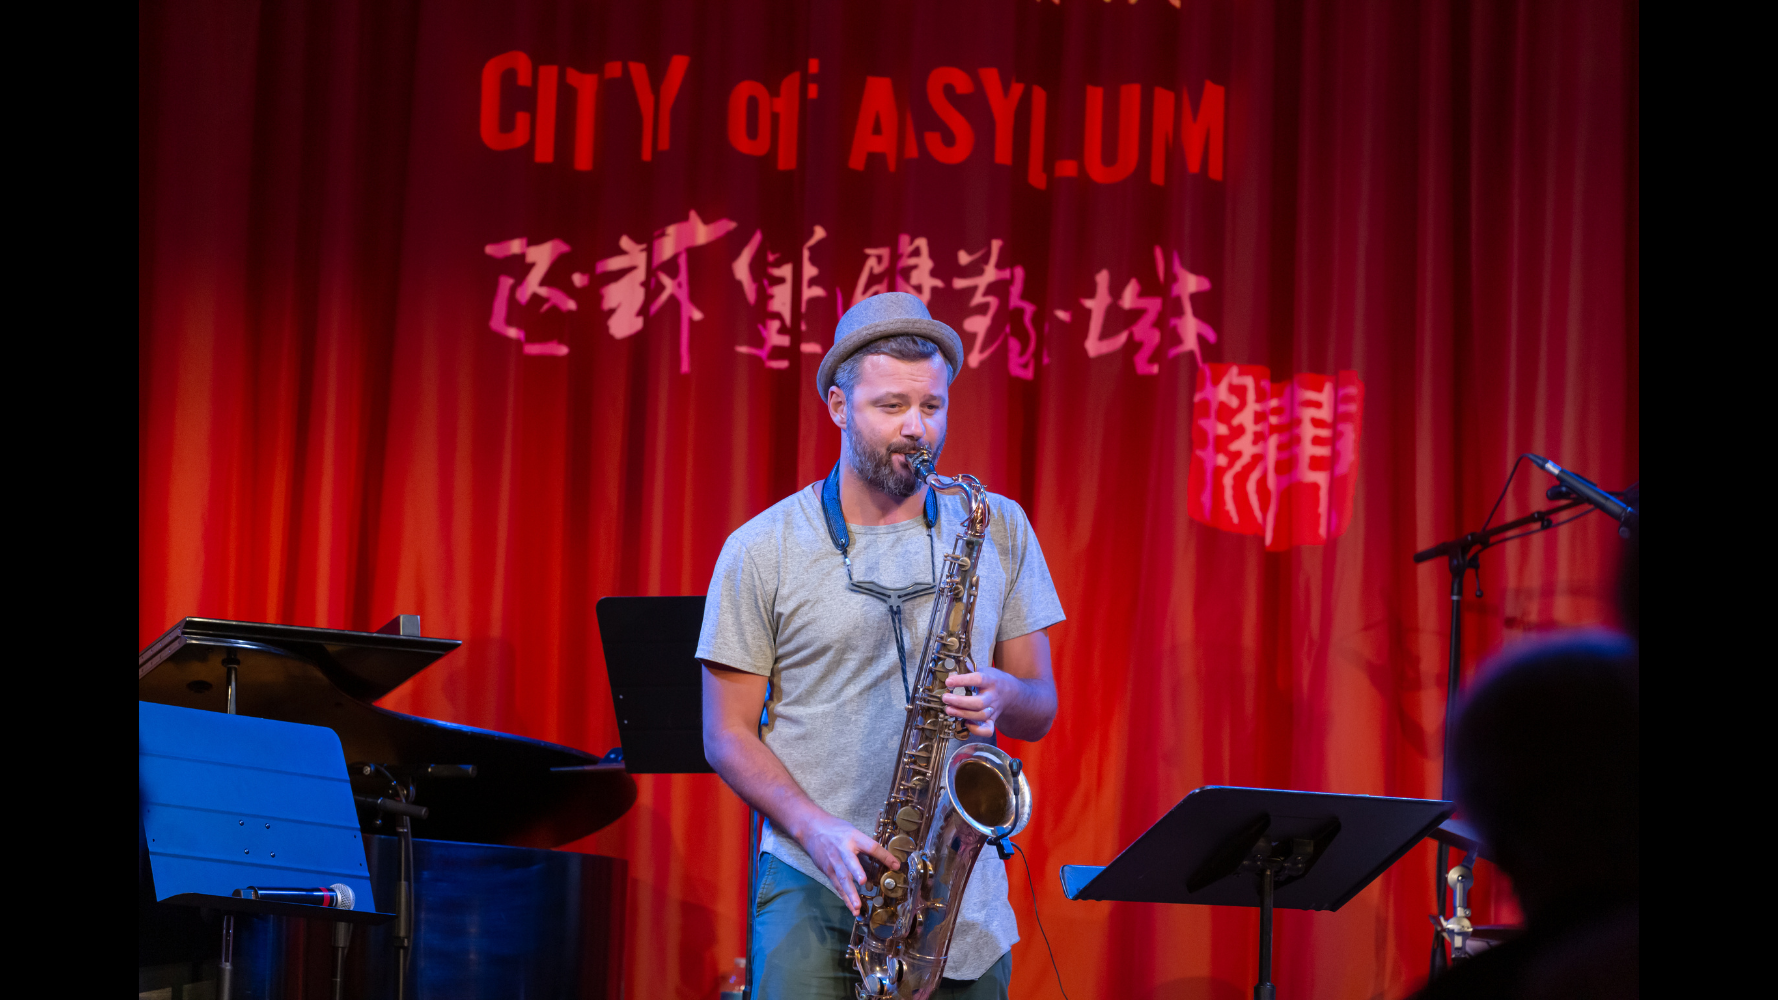 Image of musician playing tenor saxophone on a stage with other instruments in background